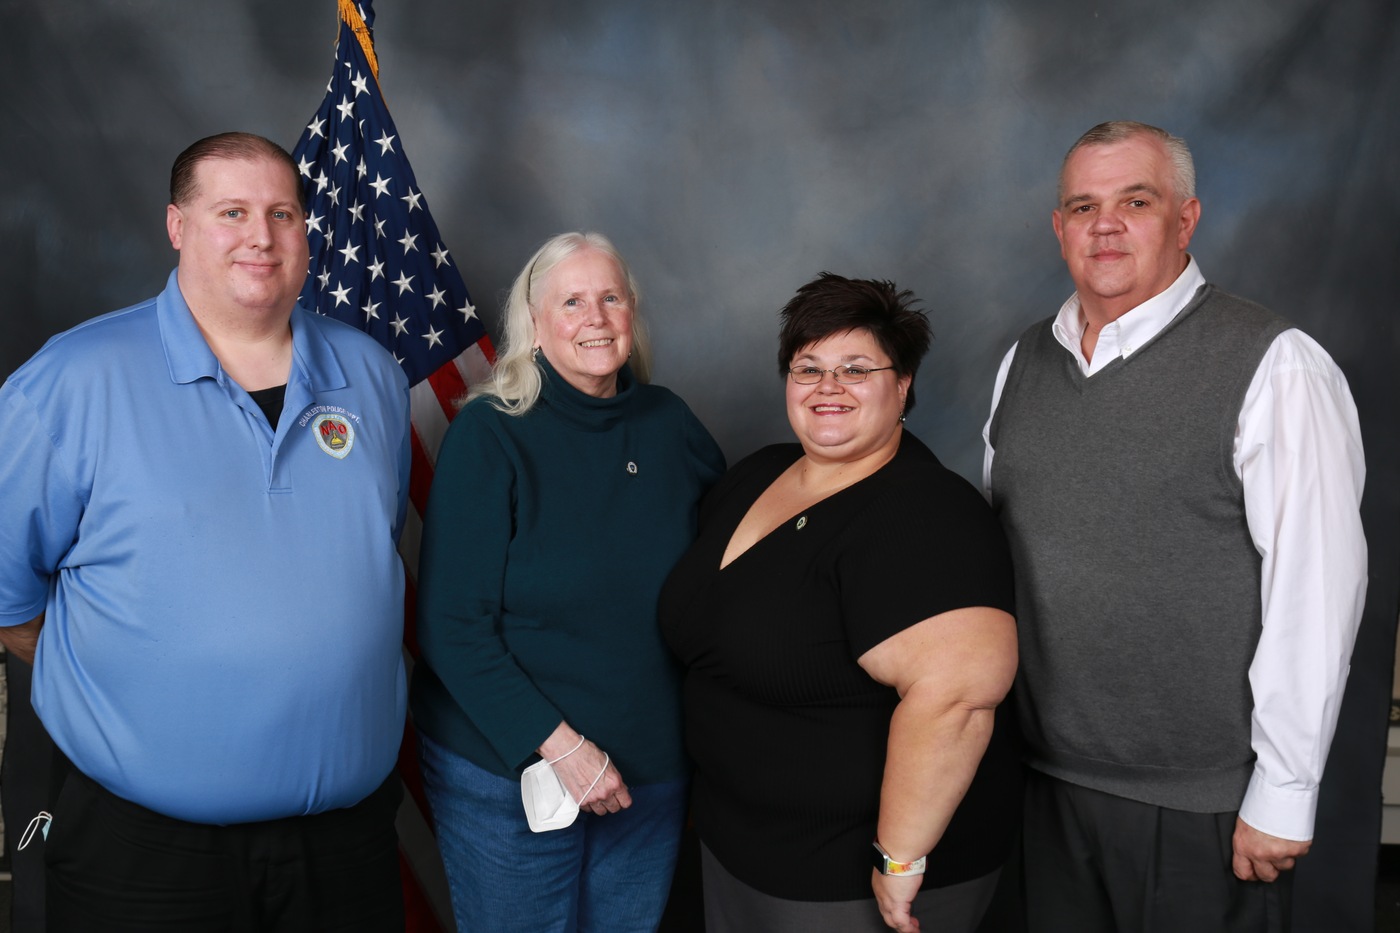 The FBI Pittsburgh Field Office announced the Charleston, West Virginia Police Department Citizens Police Academy Alumni Association (CPAAA) as the recipient of the 2021 FBI Director’s Community Leadership Award (DCLA).